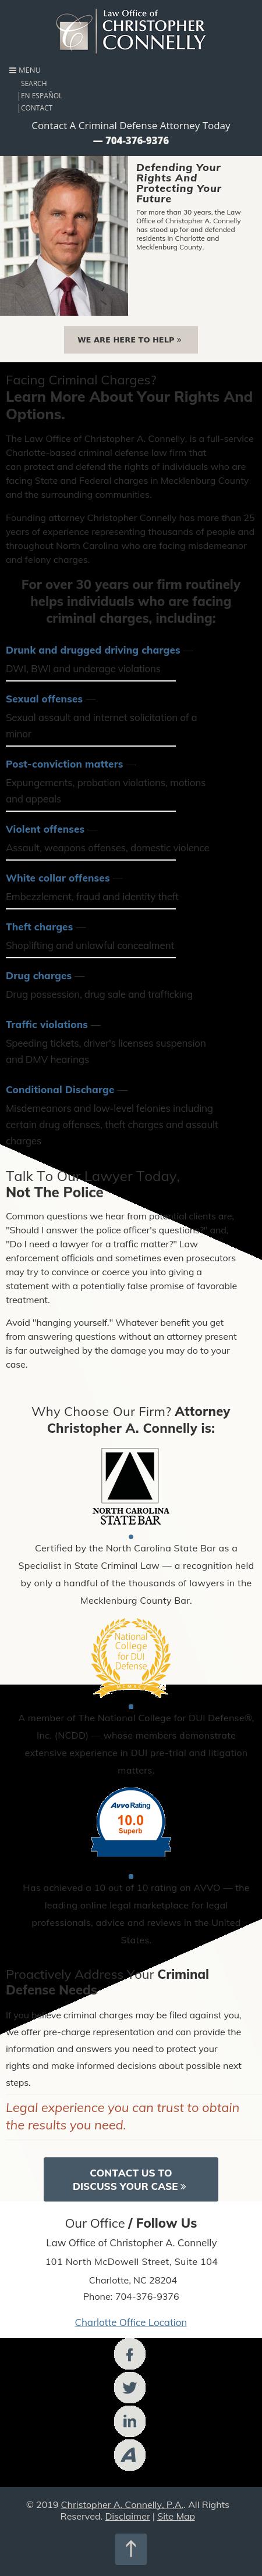 Law Office of Christopher A. Connelly - Charlotte NC Lawyers